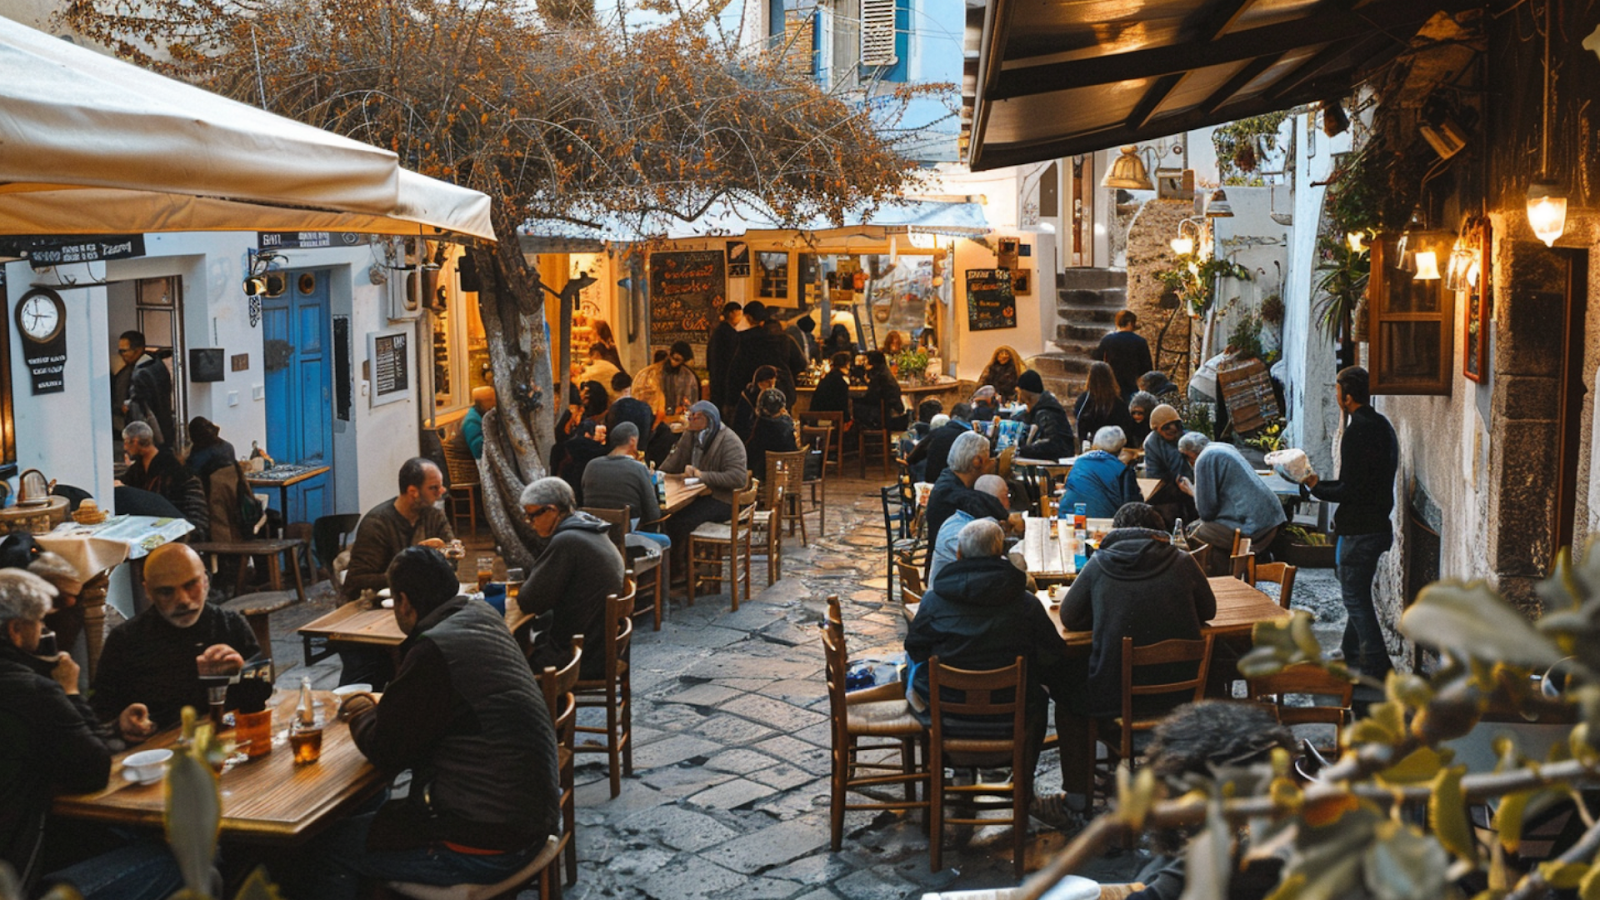 A cafe filled with patrons, a usual scenario discussed at off-season guides in Santorini